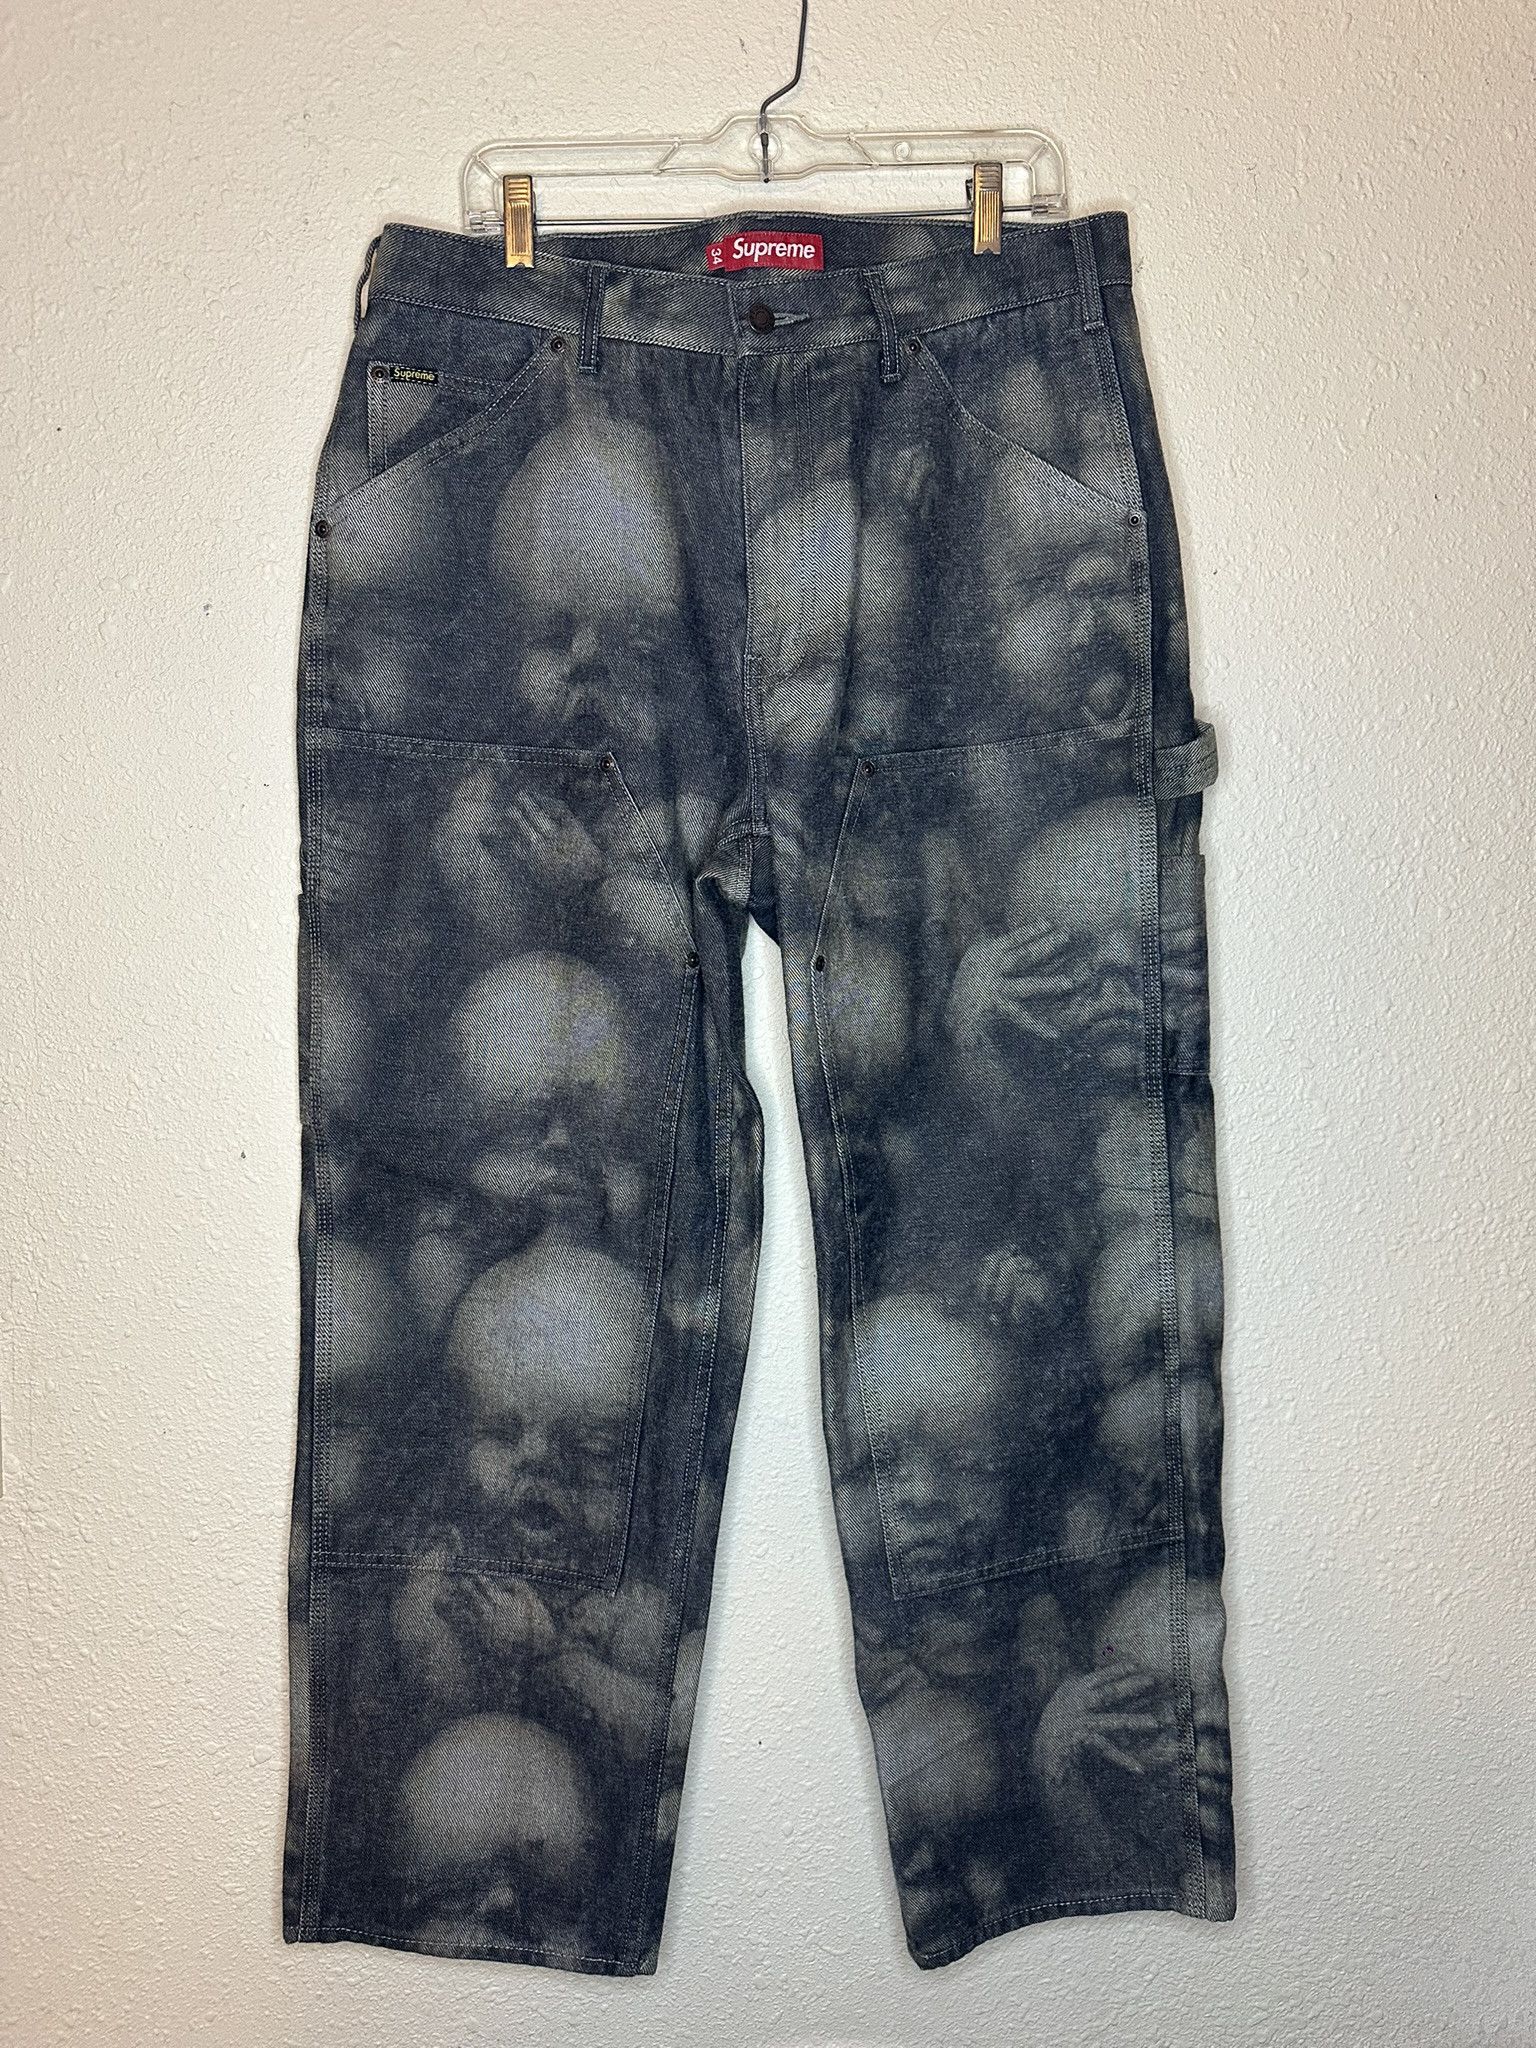 Supreme Supreme x H.R. Giger Double Knee Jean (Baby Face Pants 